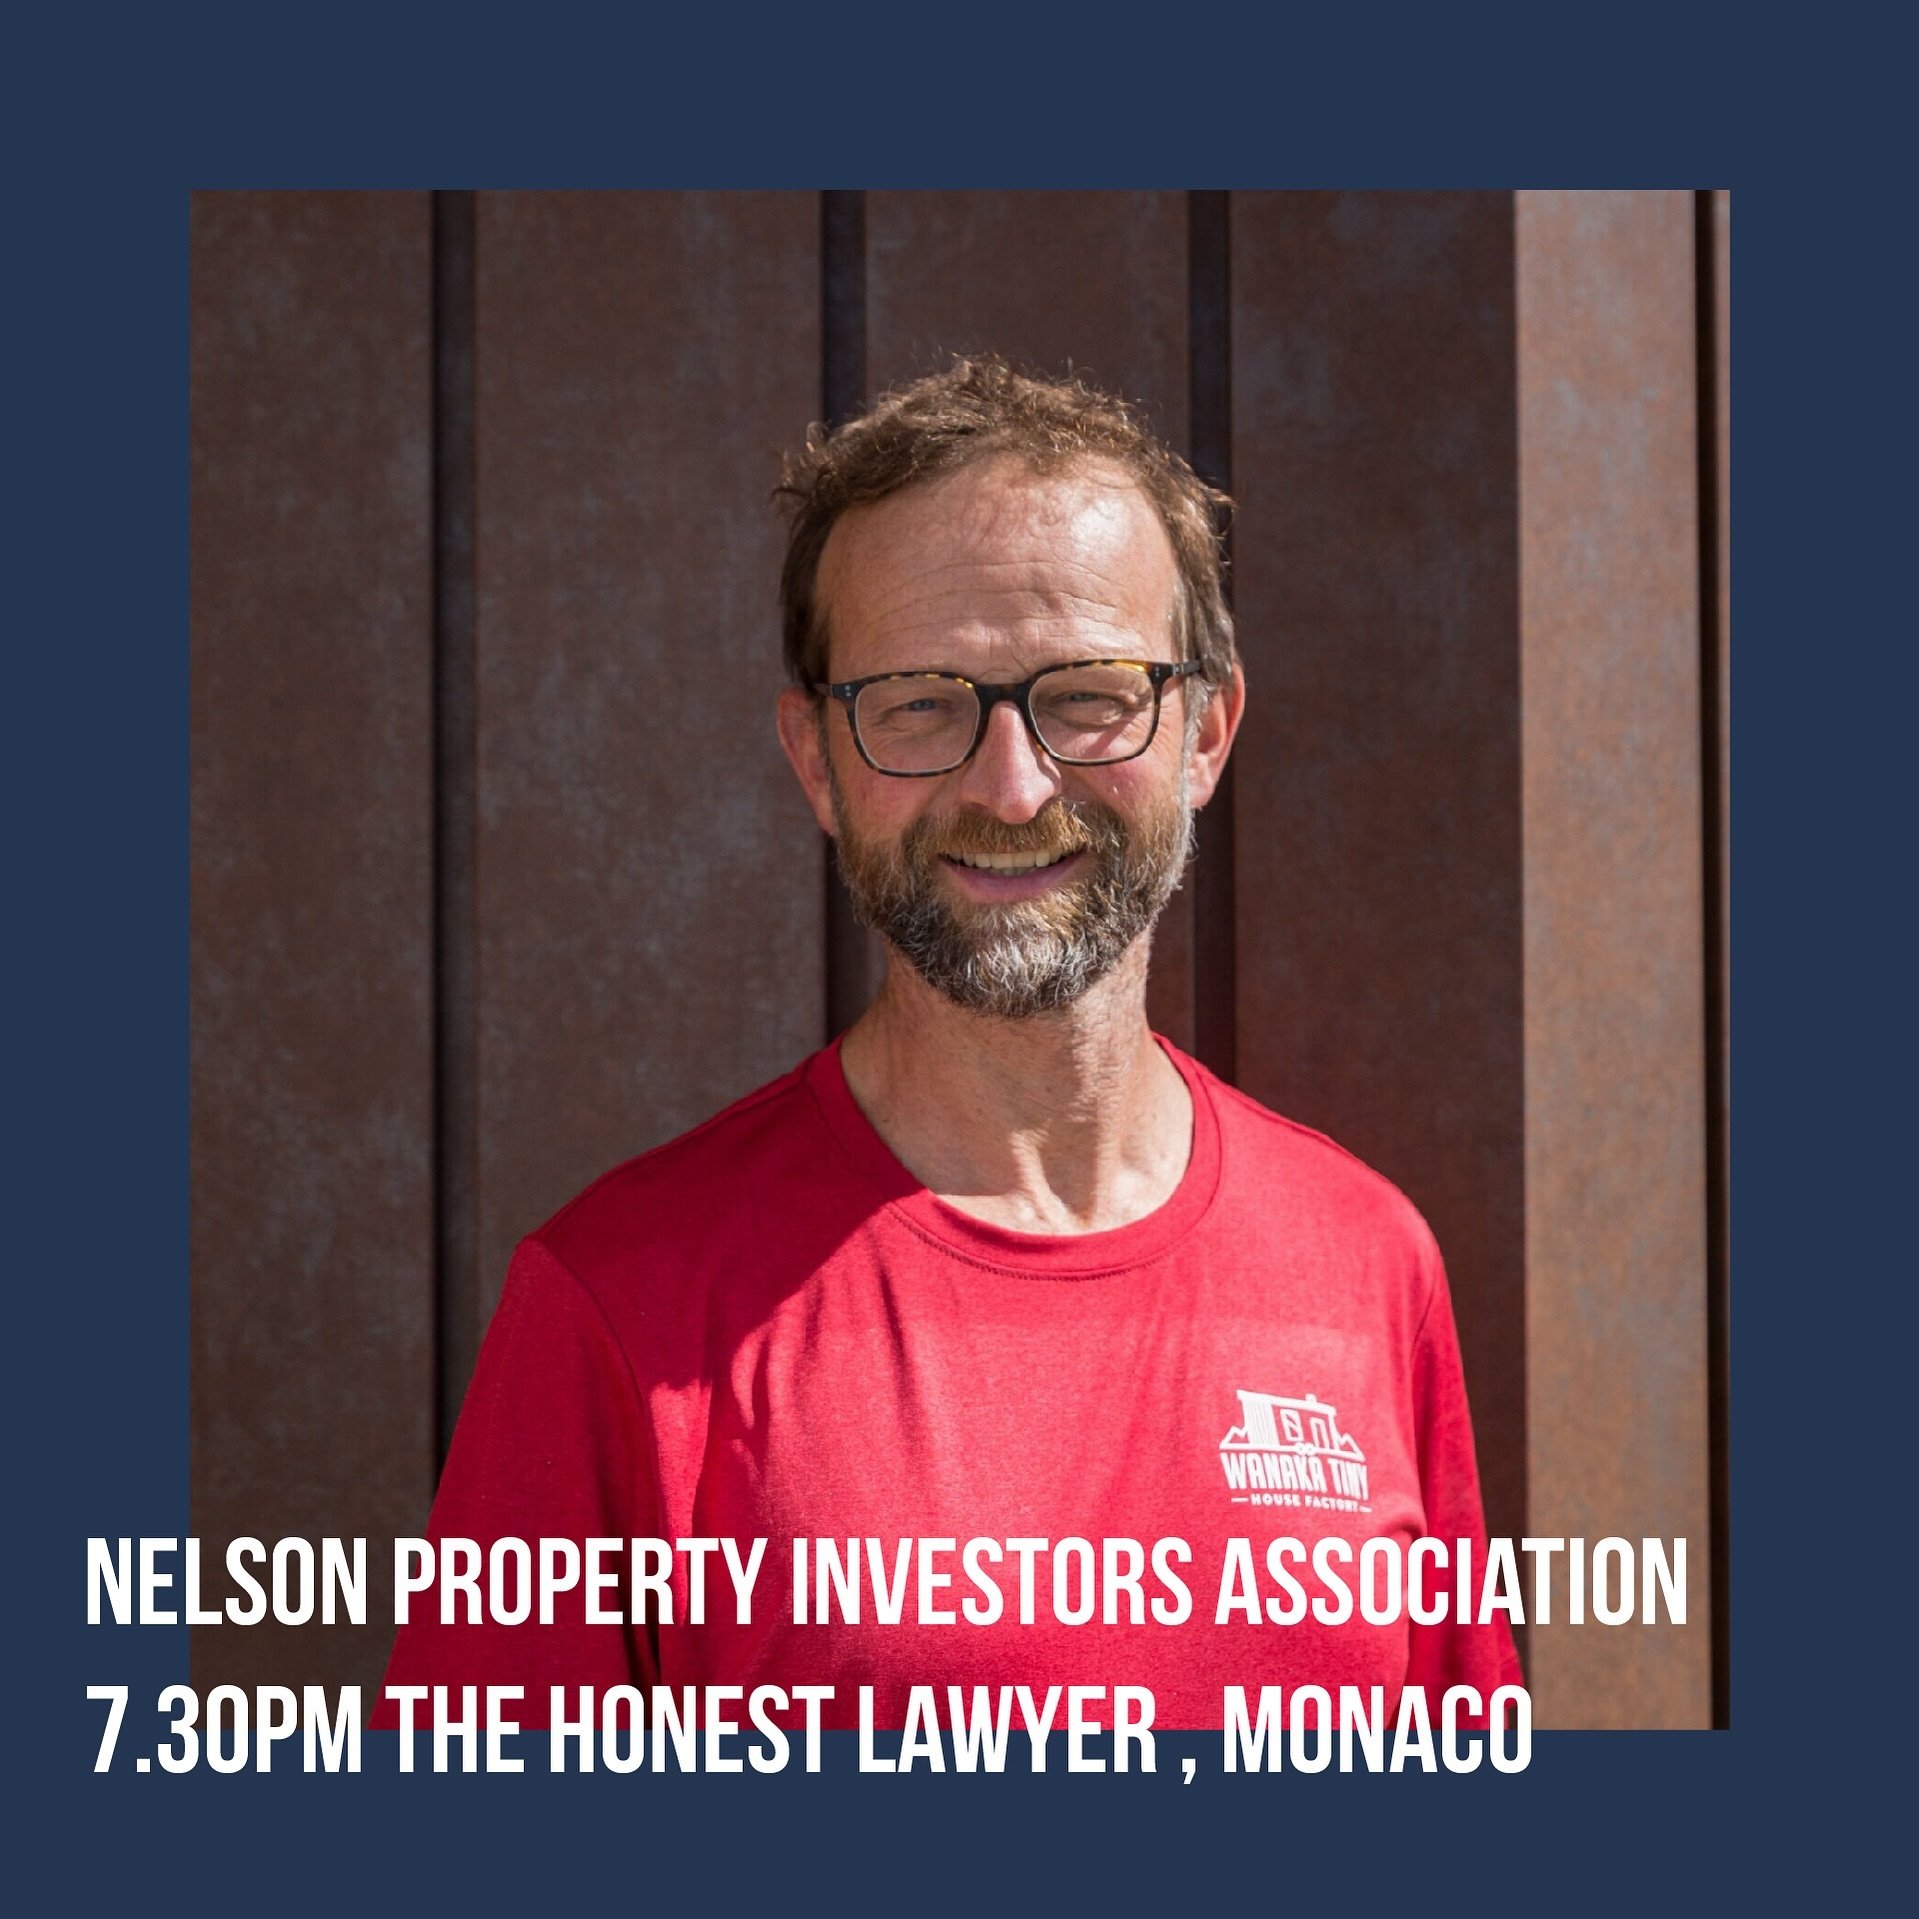 Our Director Thomas is speaking tonight at the Nelson property investors association.
If you want to hear more about tiny homes or have questions and if you find yourself free this evening then come hear from Thomas.

There is a livestream available 